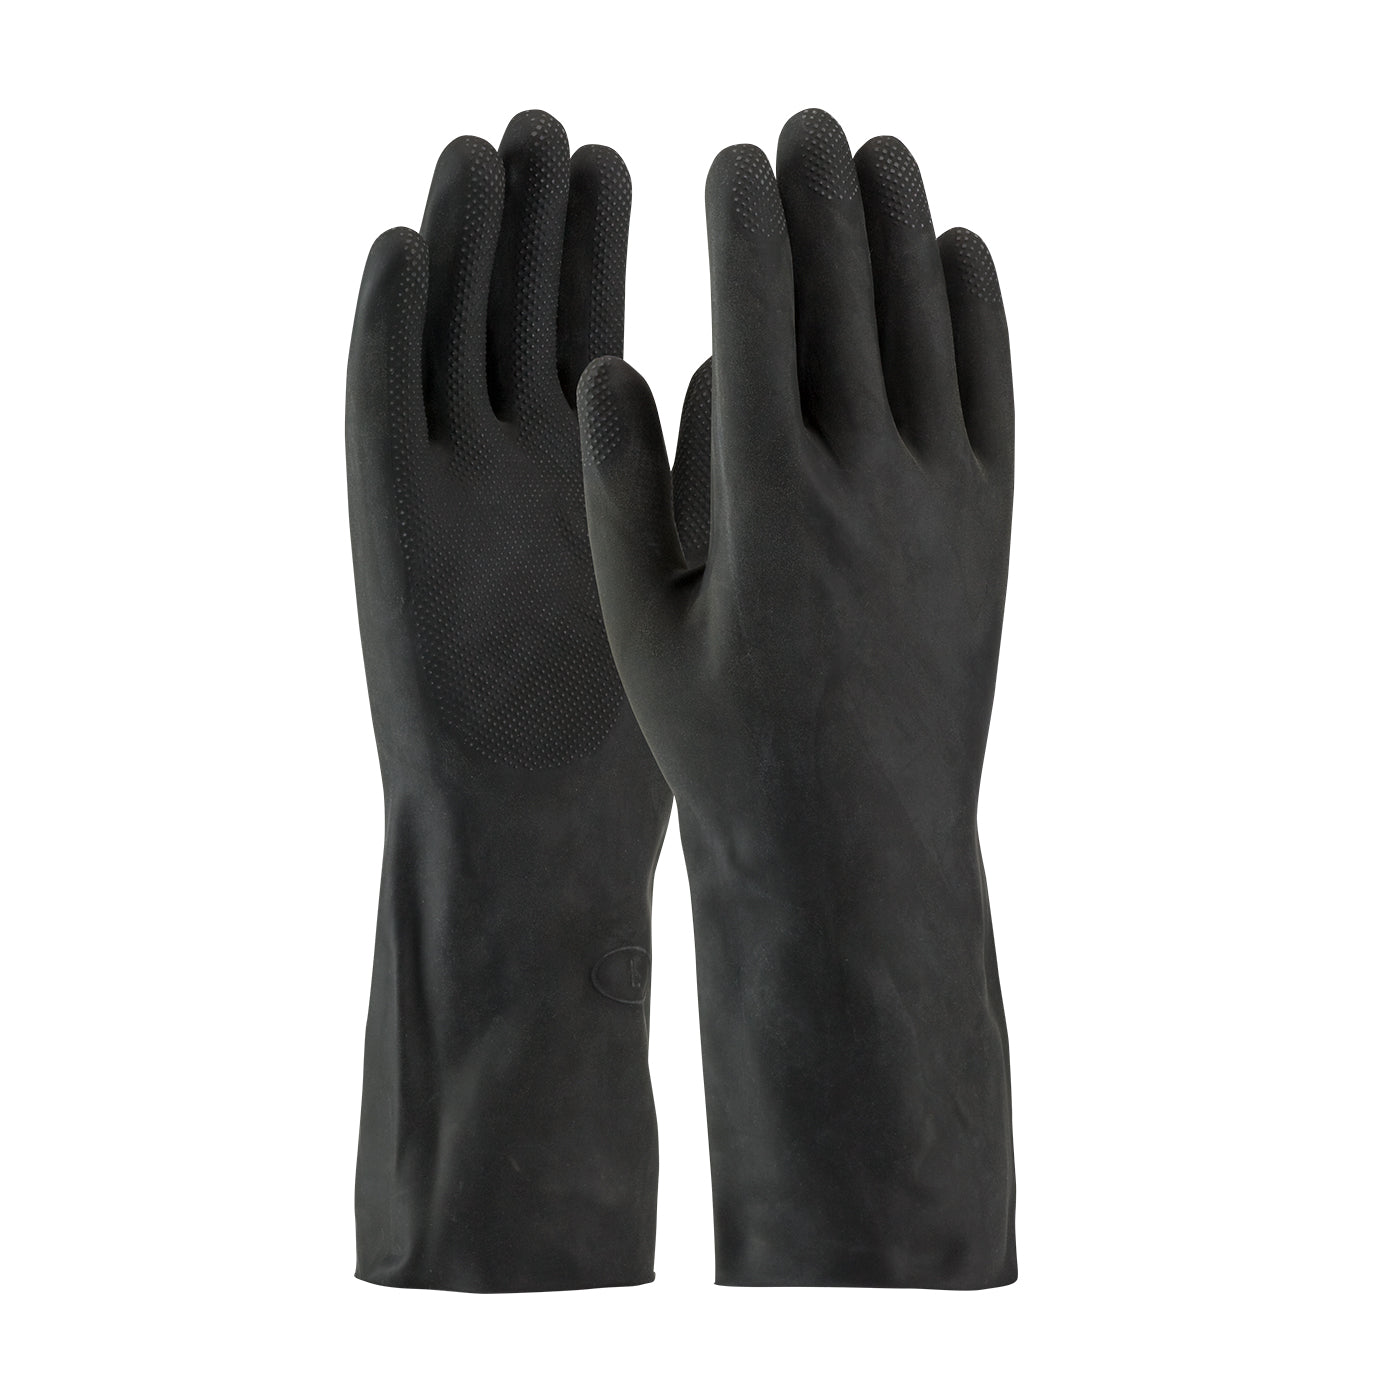 Black Latex Gloves 28-mil Flock Lined with Raised Diamond Grip - Pack of 12 Pairs